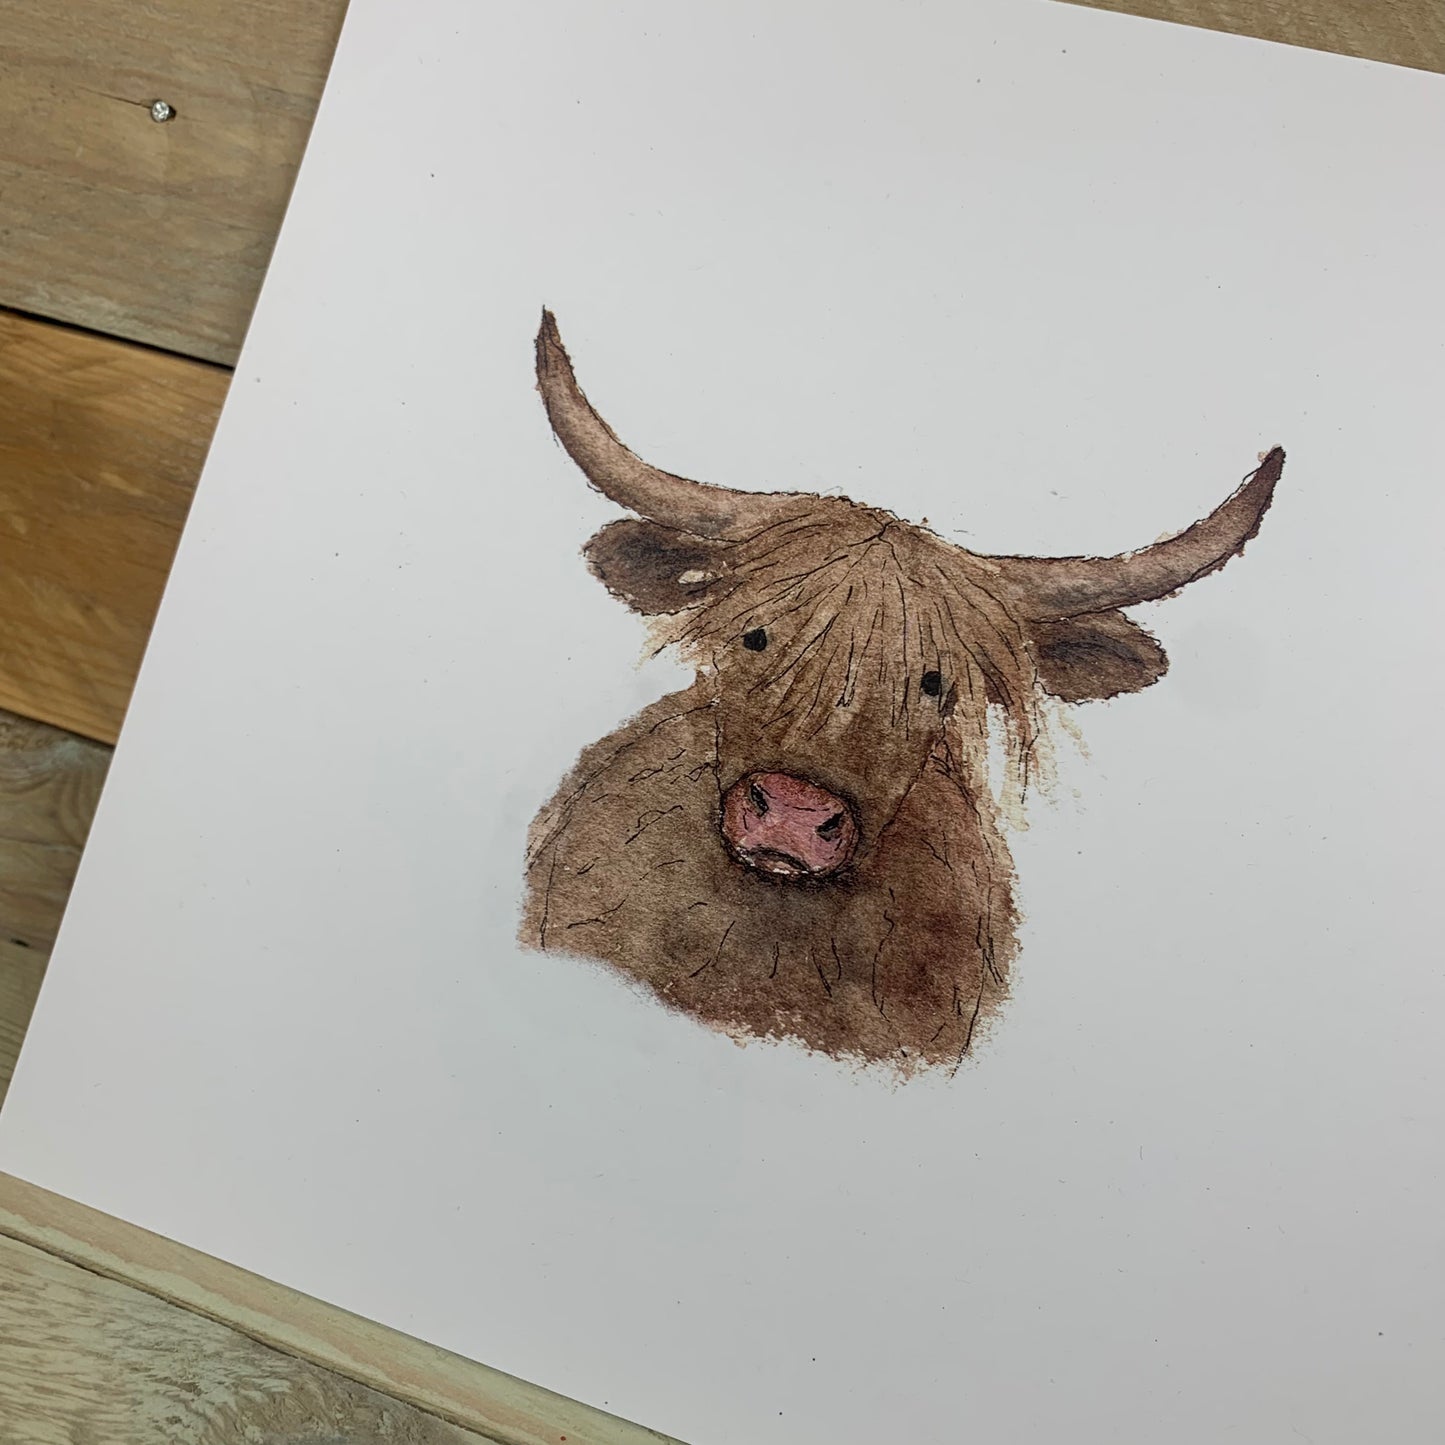 Highland Cow Square Print - Arty Bee Designs 